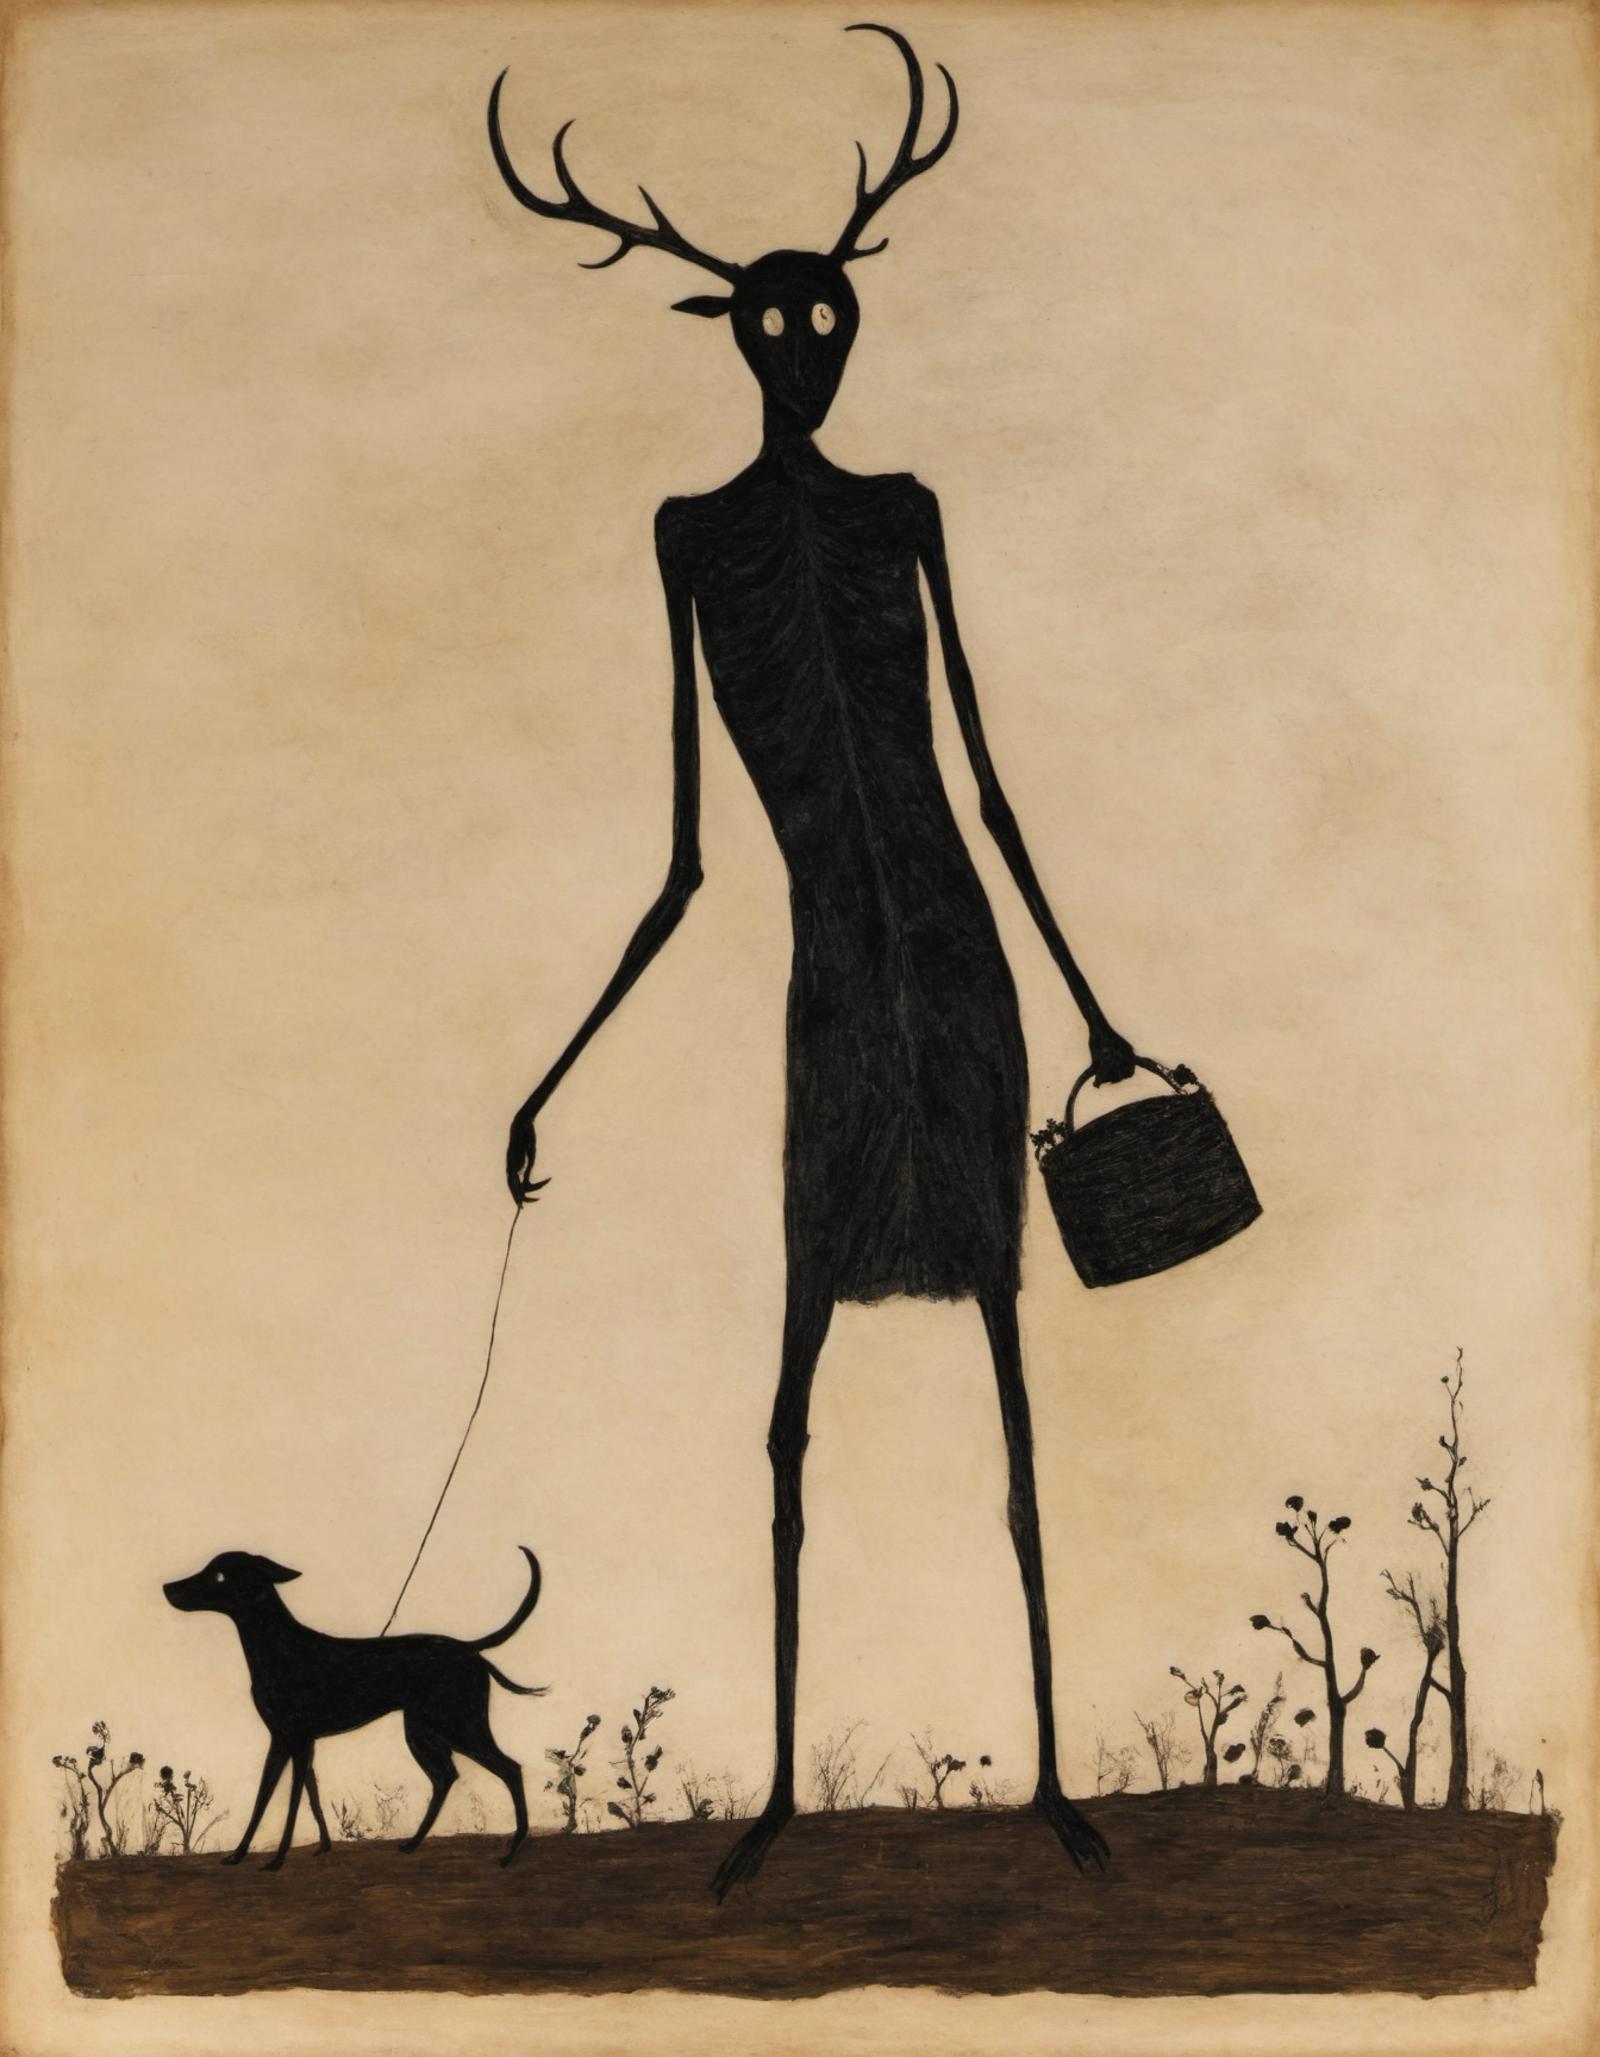 A silhouette of a man walking a dog while holding a watering can.